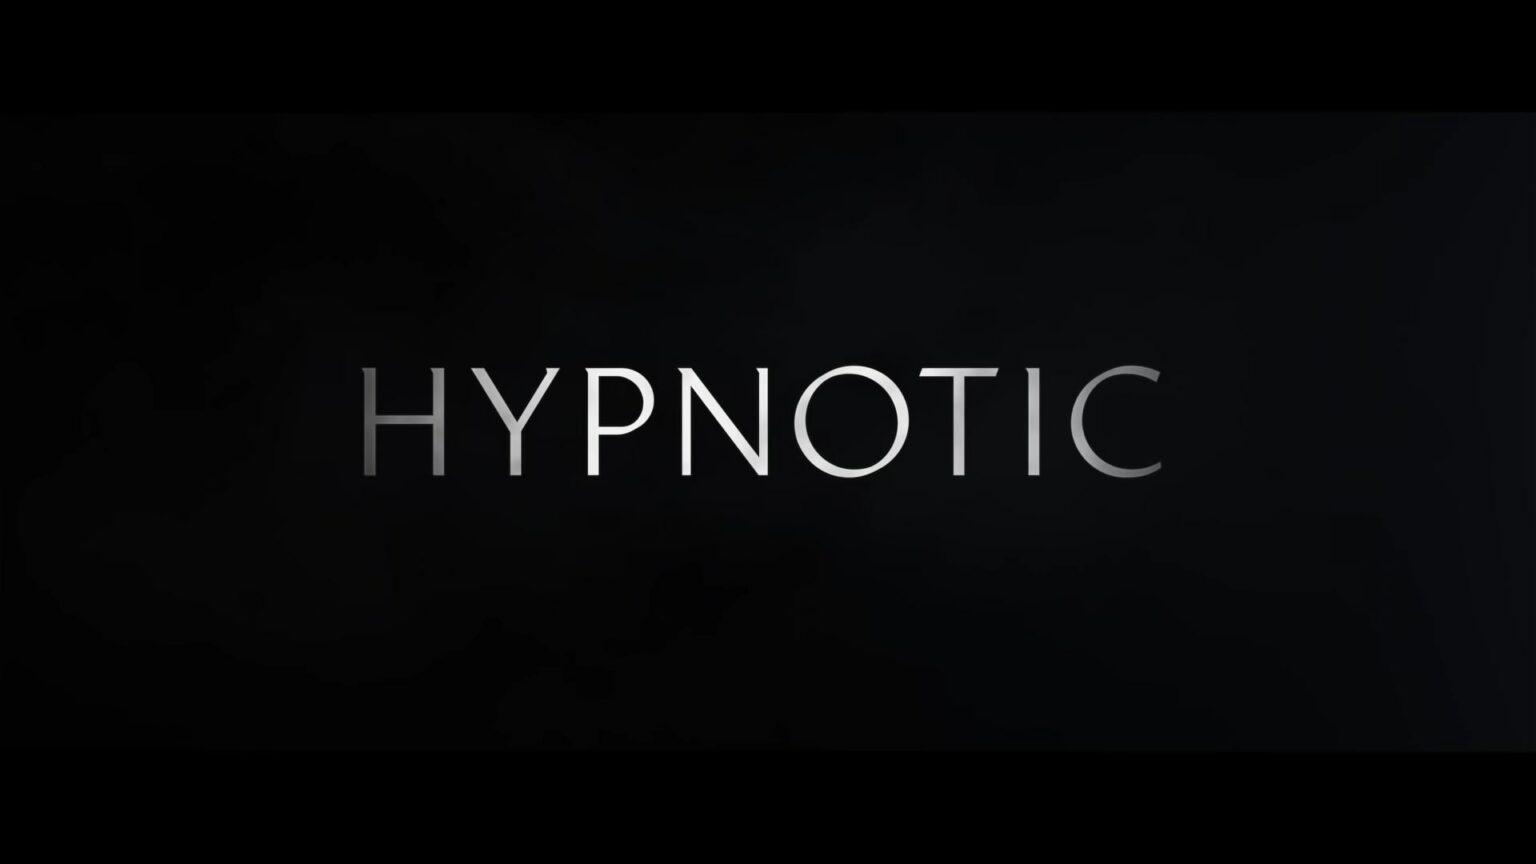 🎬 Hypnotic [TRAILER] Coming to Netflix October 27, 2021